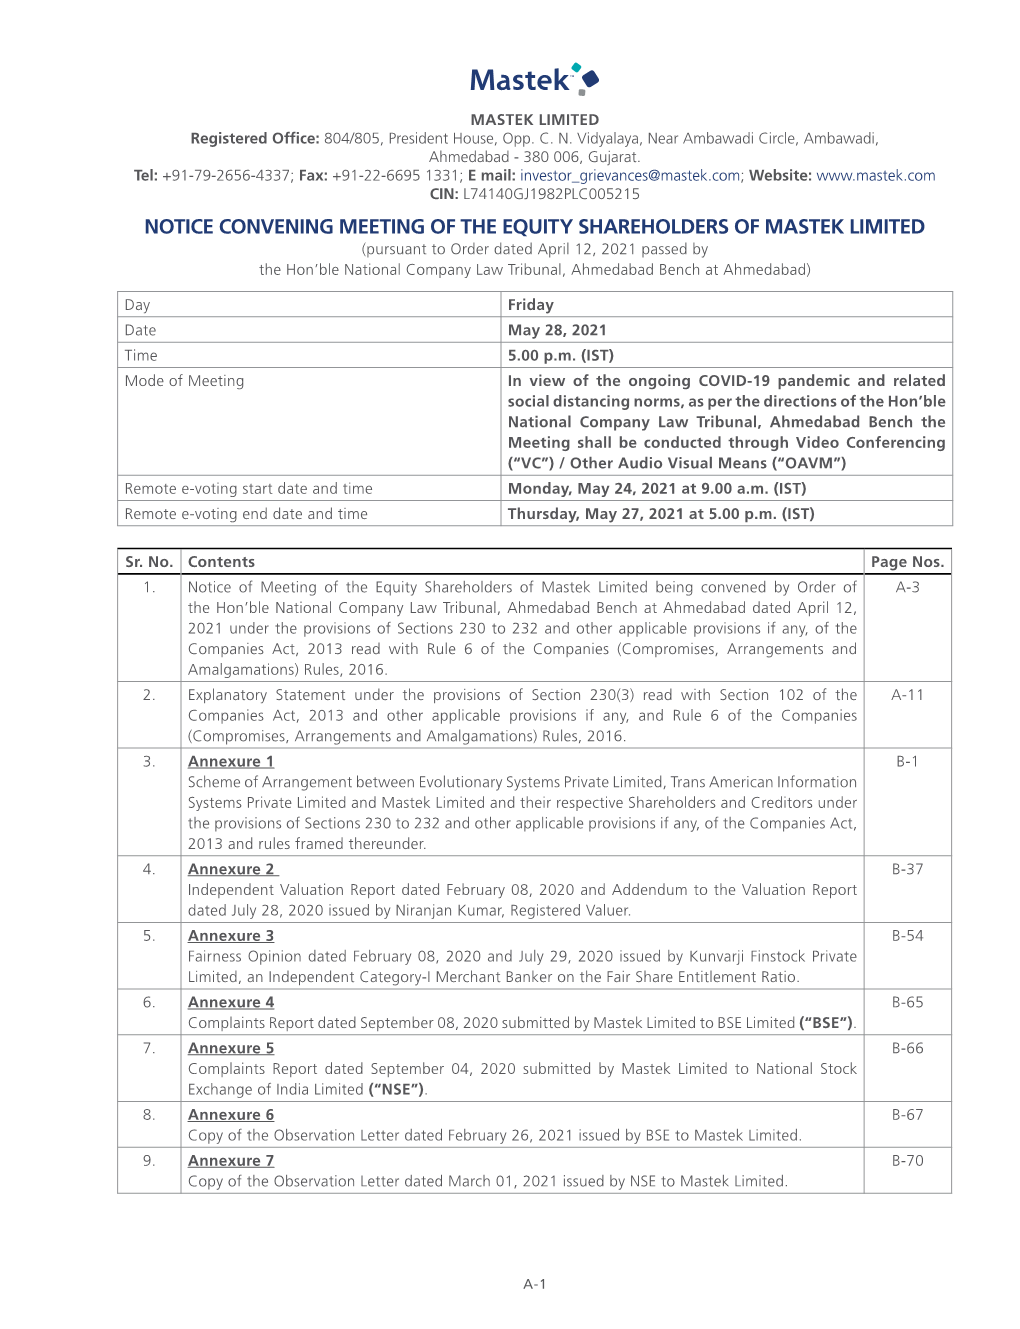 NCLT Meeting of Equity Shareholders Of